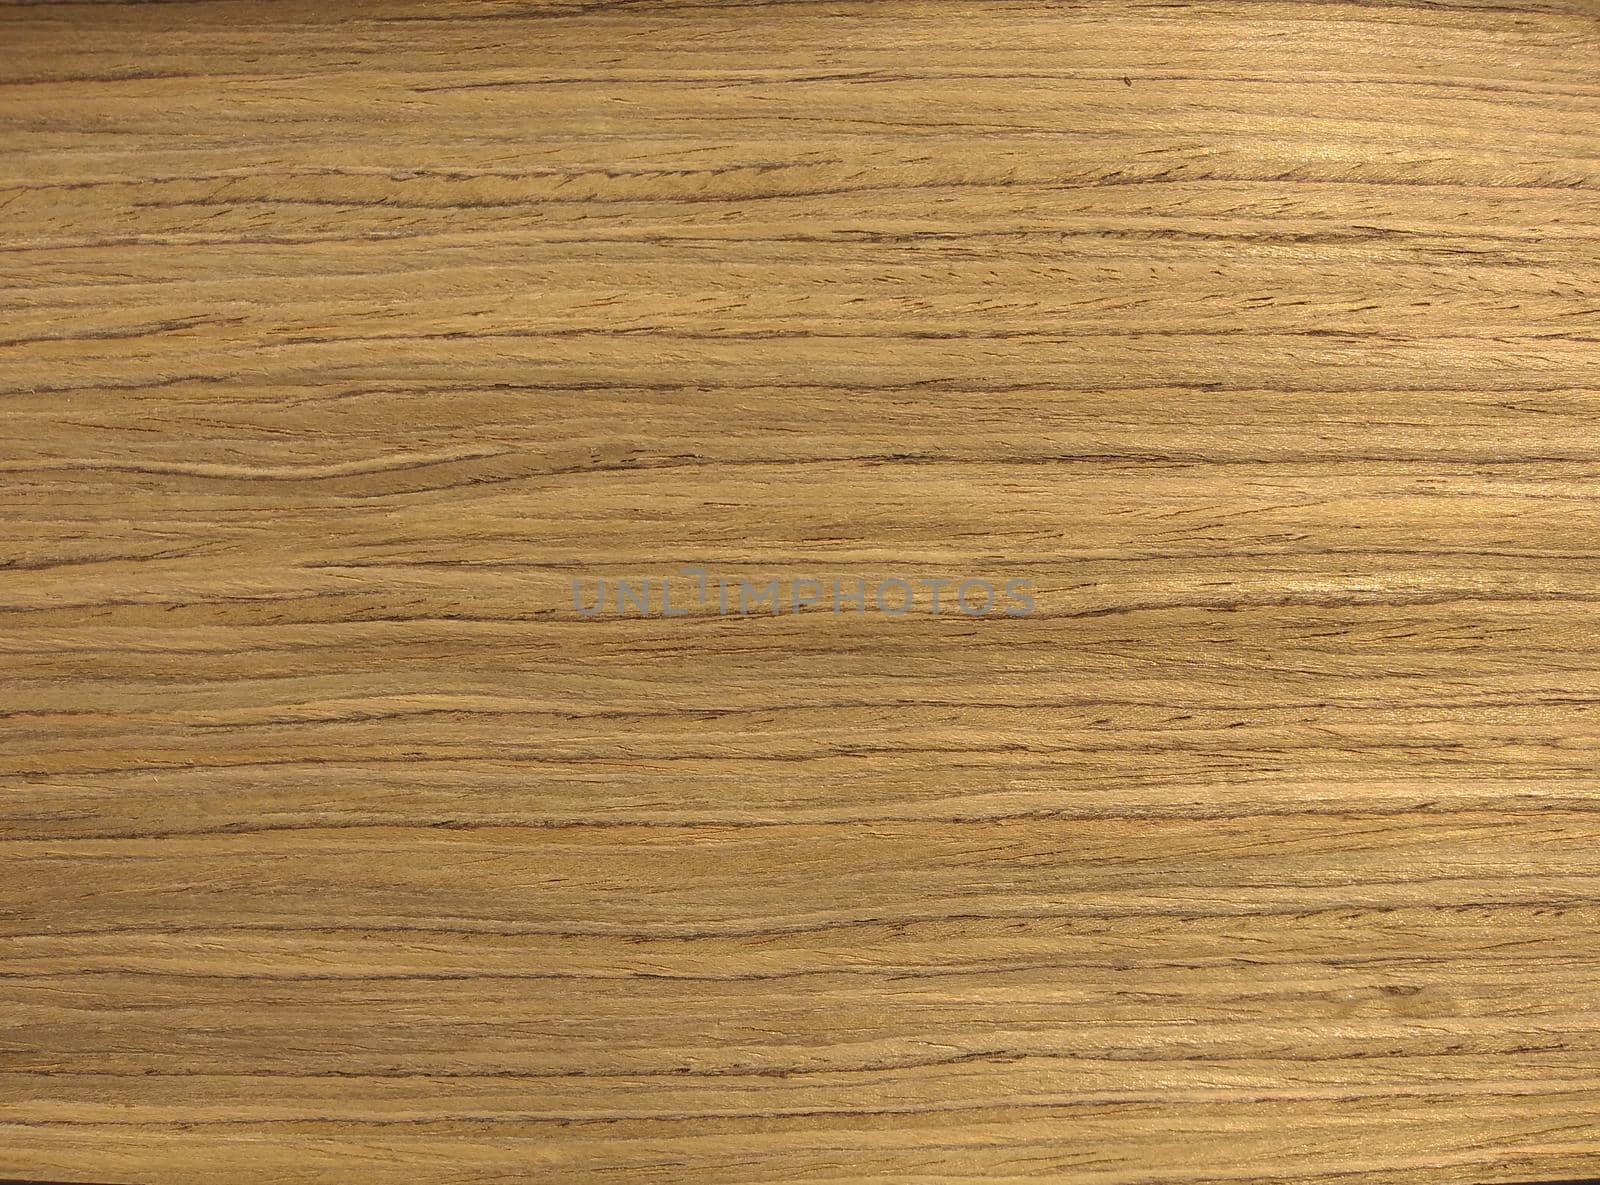 Natural yellow american walnut wood texture background. veneer surface for interior and exterior manufacturers use.